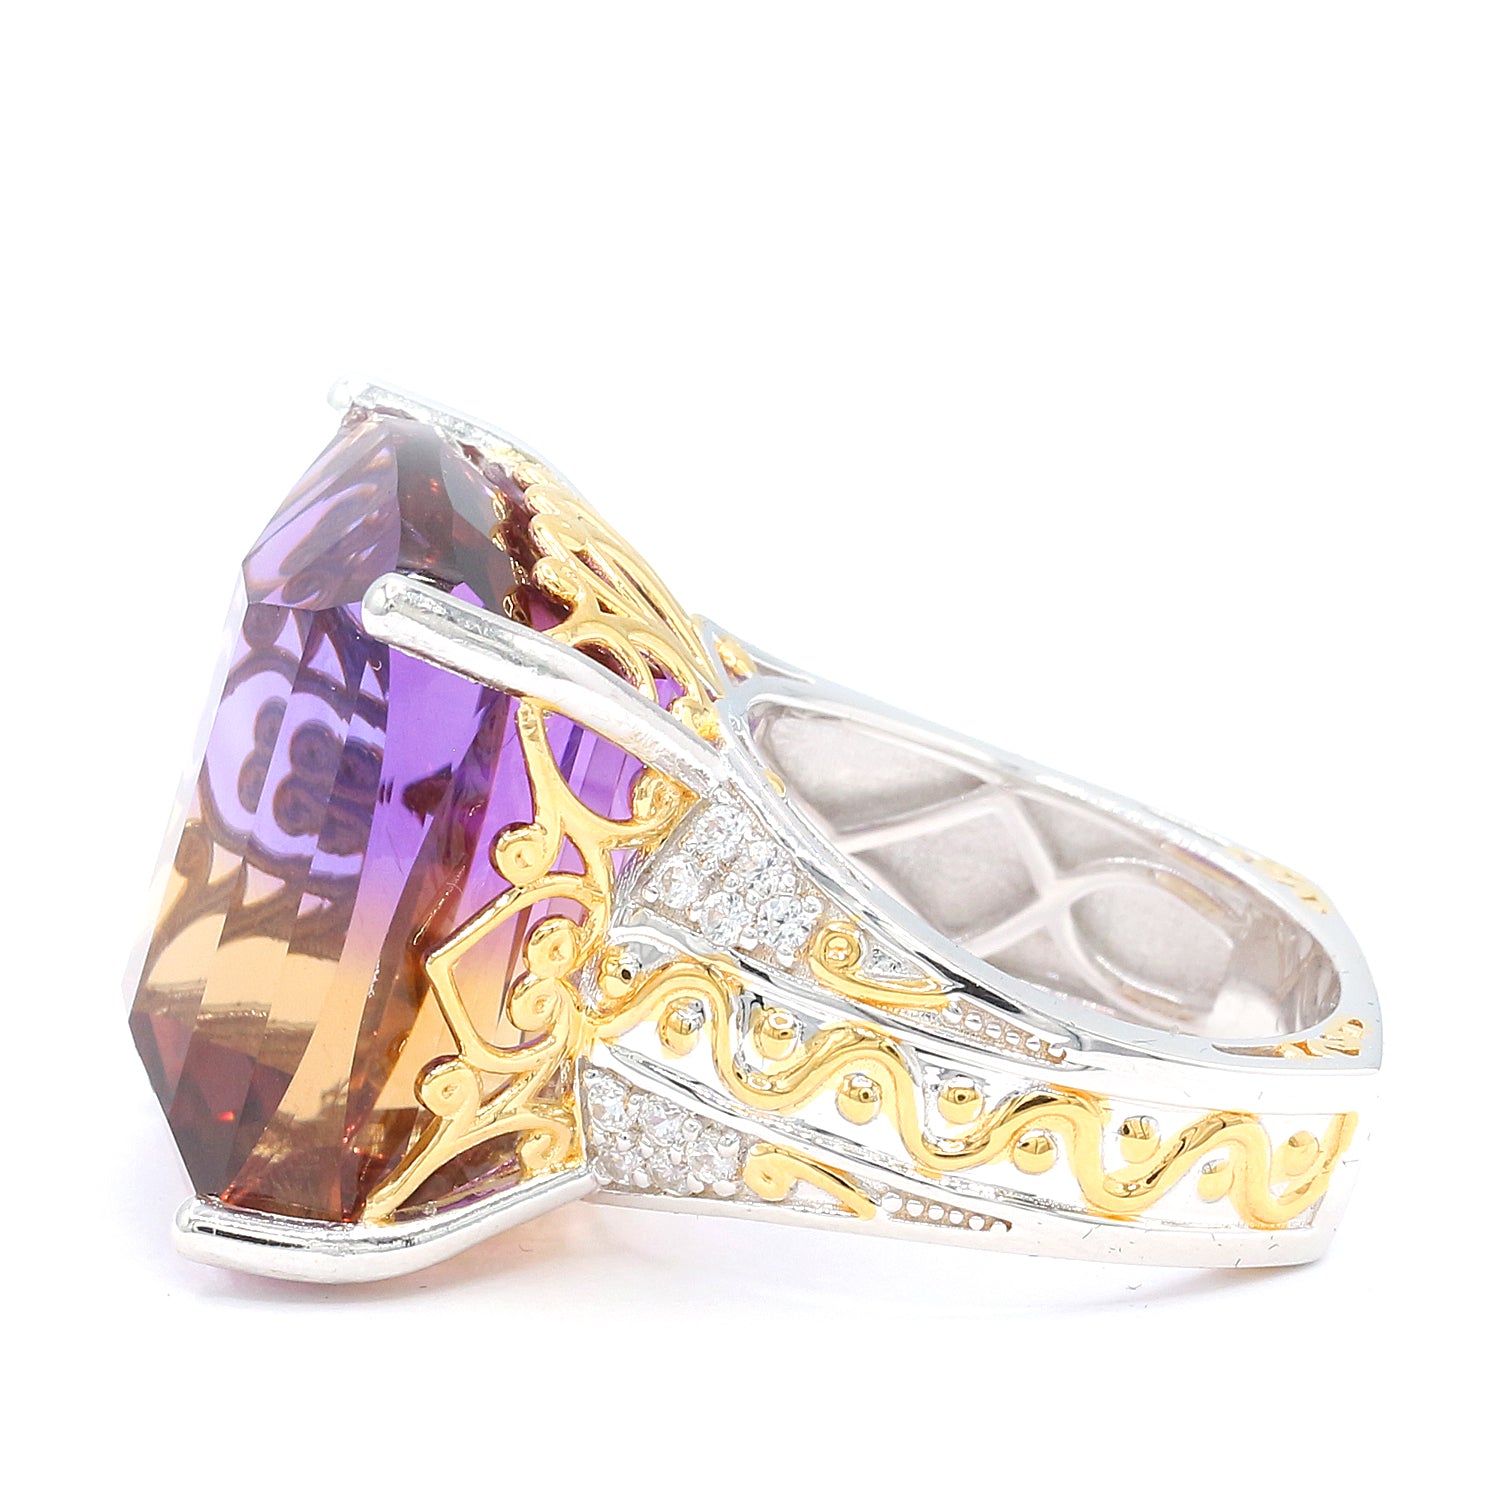 Limited Edition Gems en Vogue Luxe, One-of-a-Kind 36.88ctw Ametrine & White Zircon Honker Ring